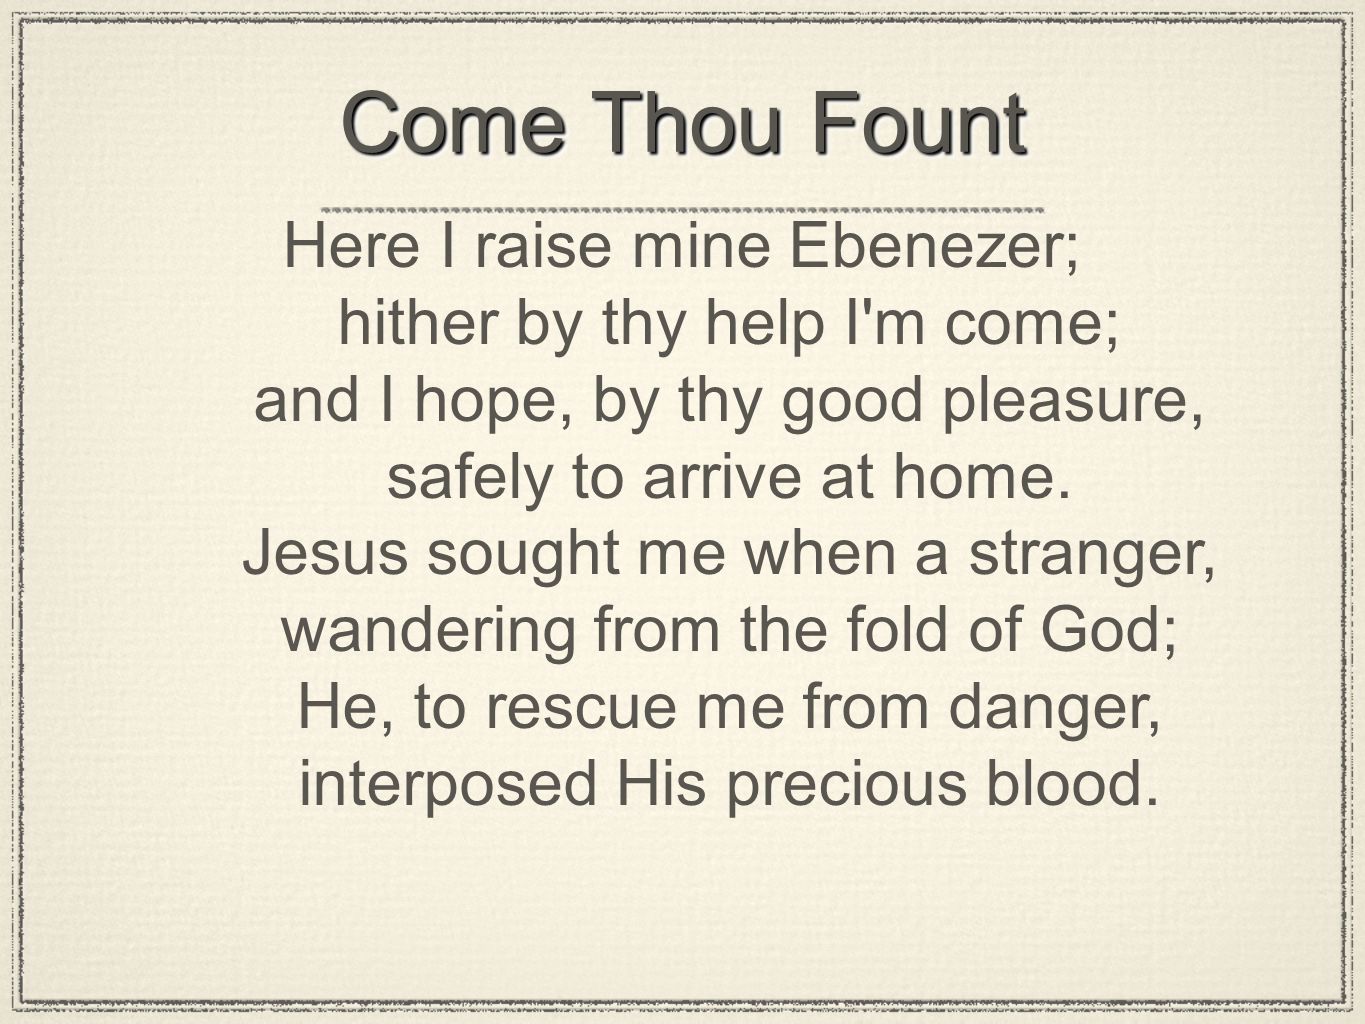 Come Thou Fount Here I raise mine Ebenezer; hither by thy help I m come; and I hope, by thy good pleasure, safely to arrive at home.